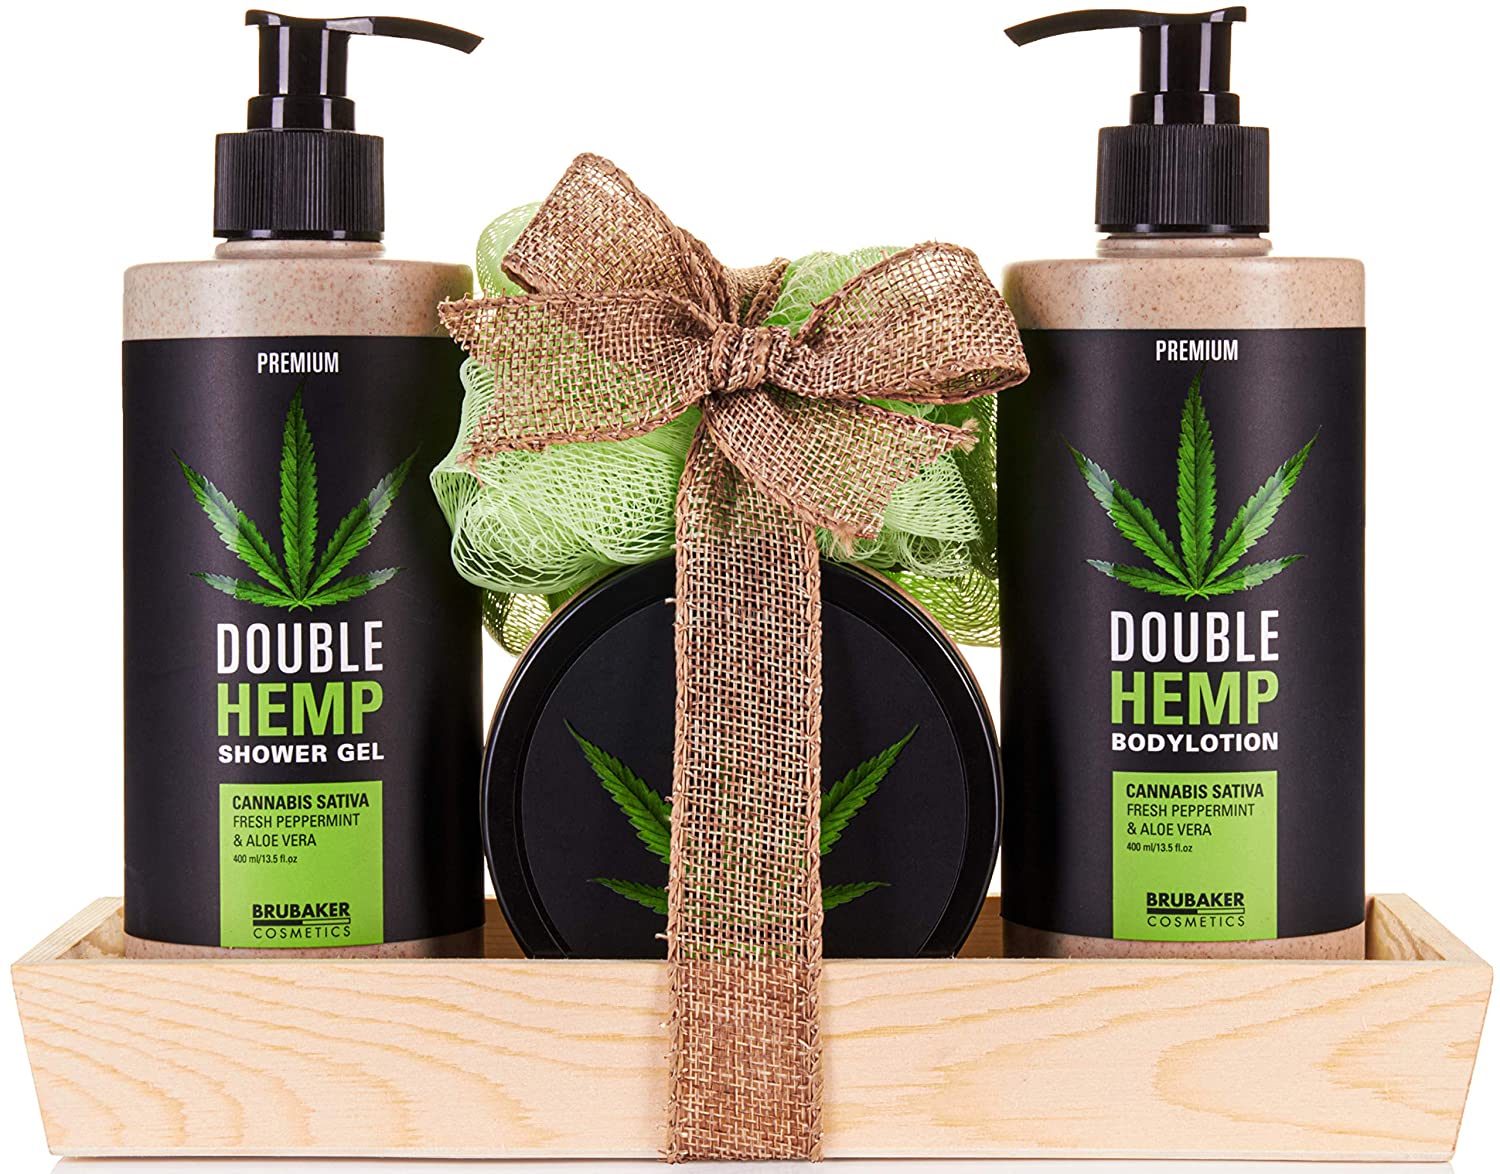 BRUBAKER Cosmetics Hemp Oil Shower and Care Set with Decorative Wooden Tray, Black, ‎grün